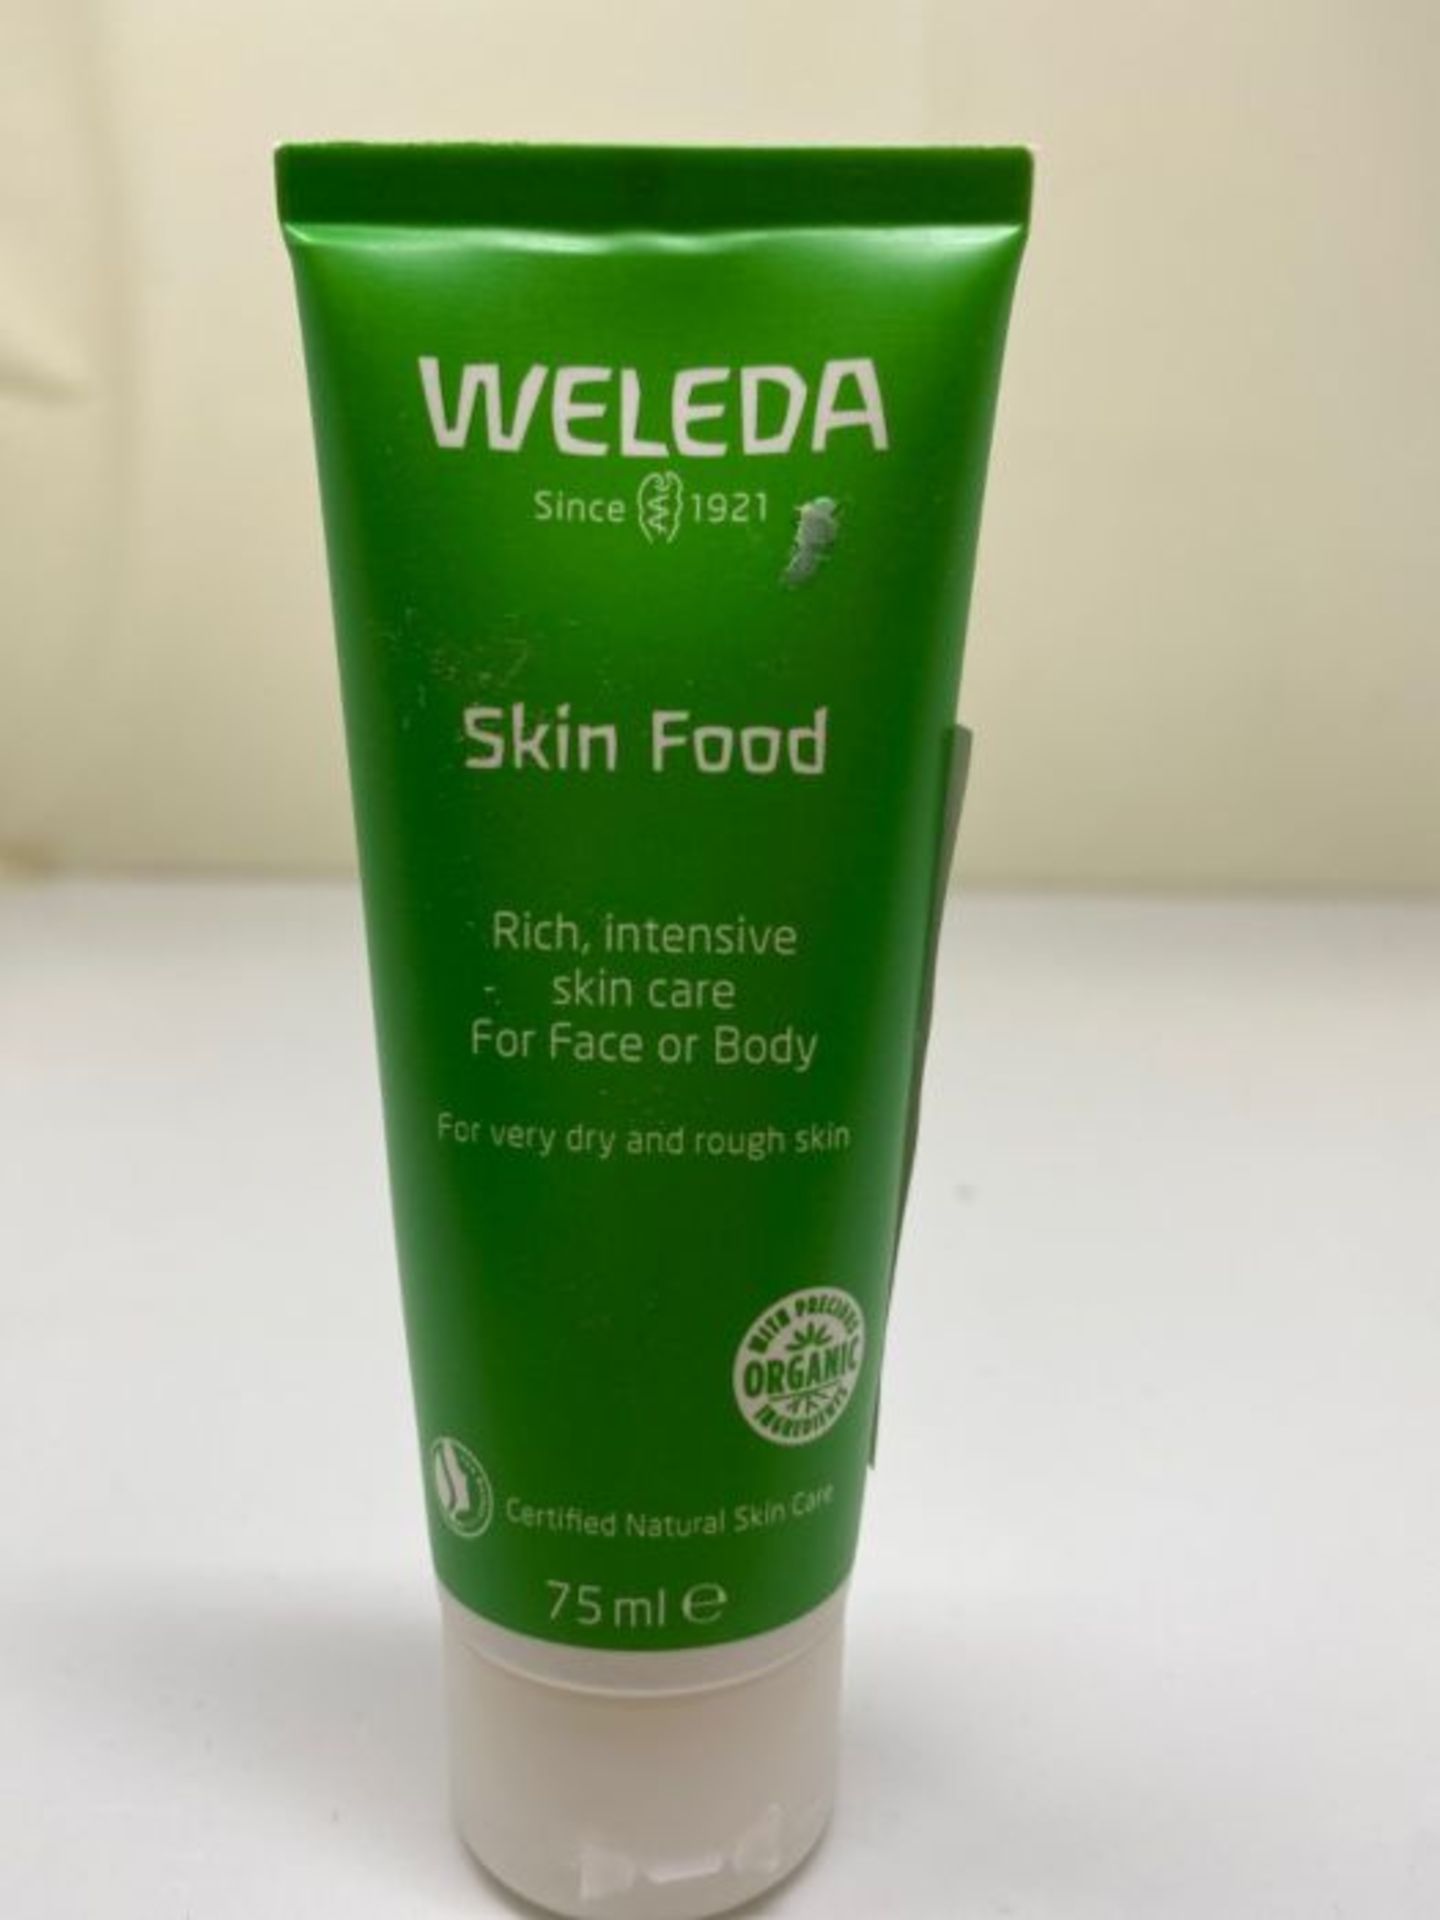 Weleda Skin Food for Dry and Rough skin, 75ml - Image 2 of 2